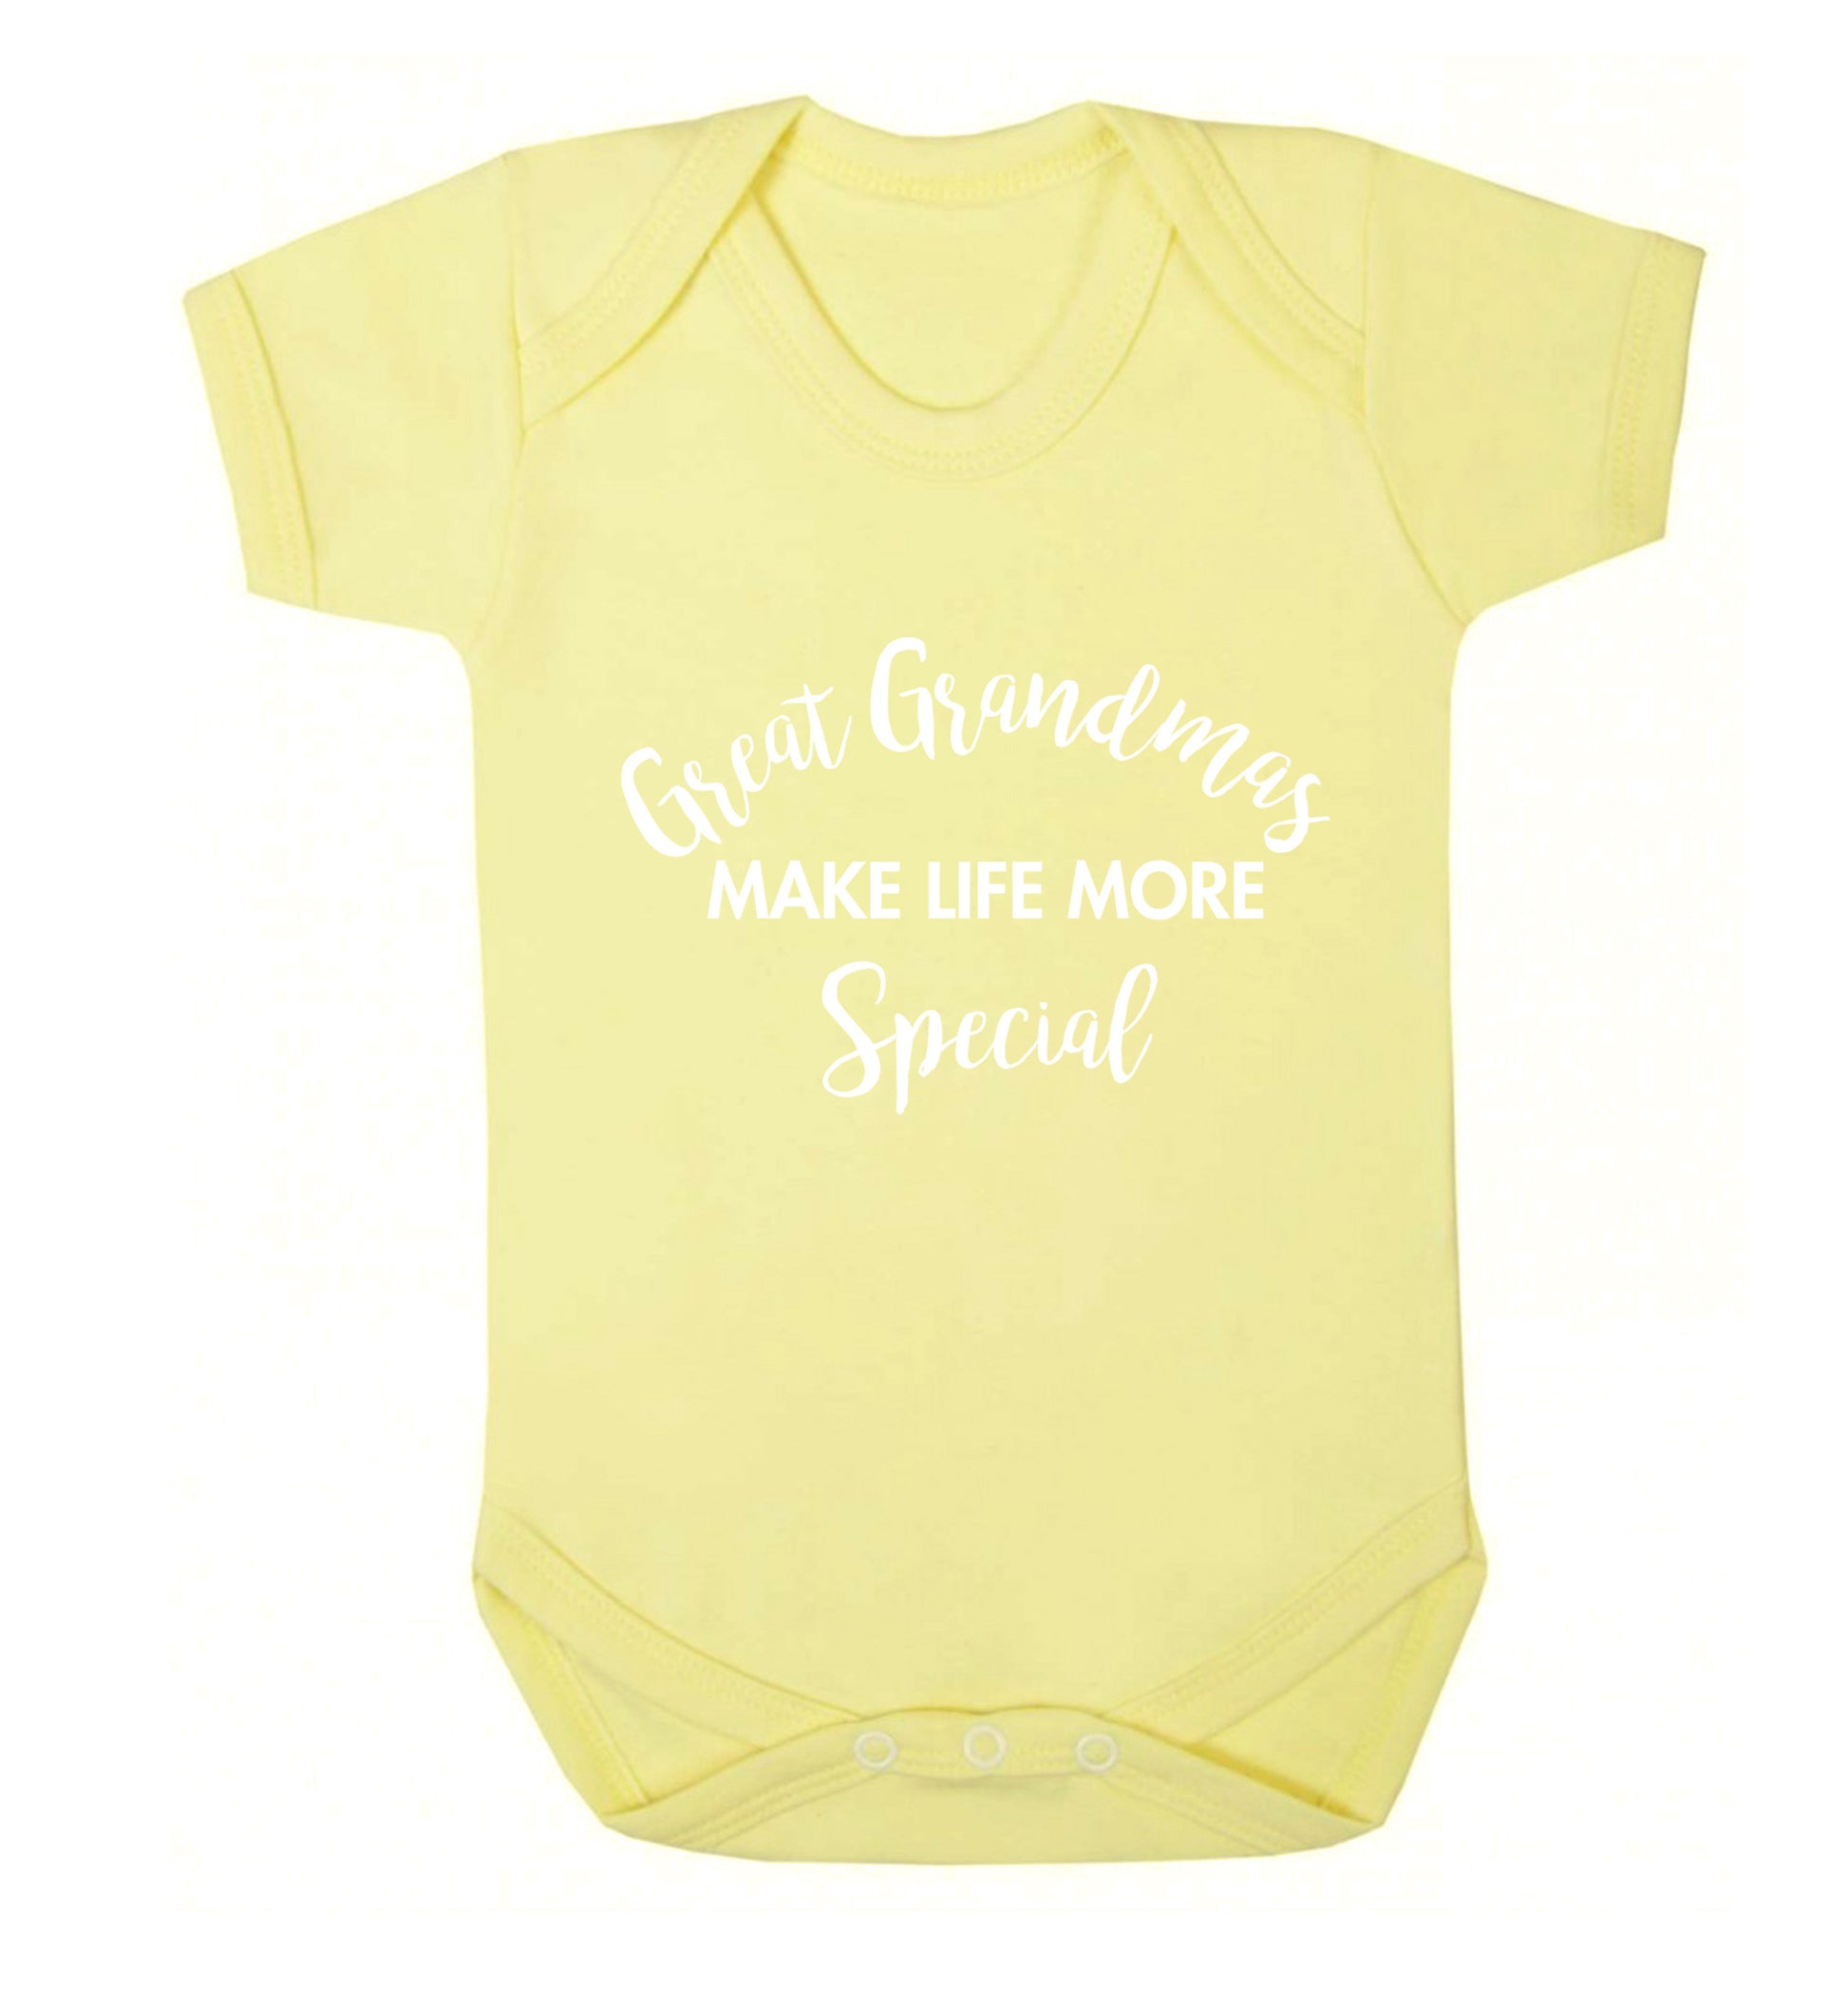 Great Grandmas make life more special Baby Vest pale yellow 18-24 months